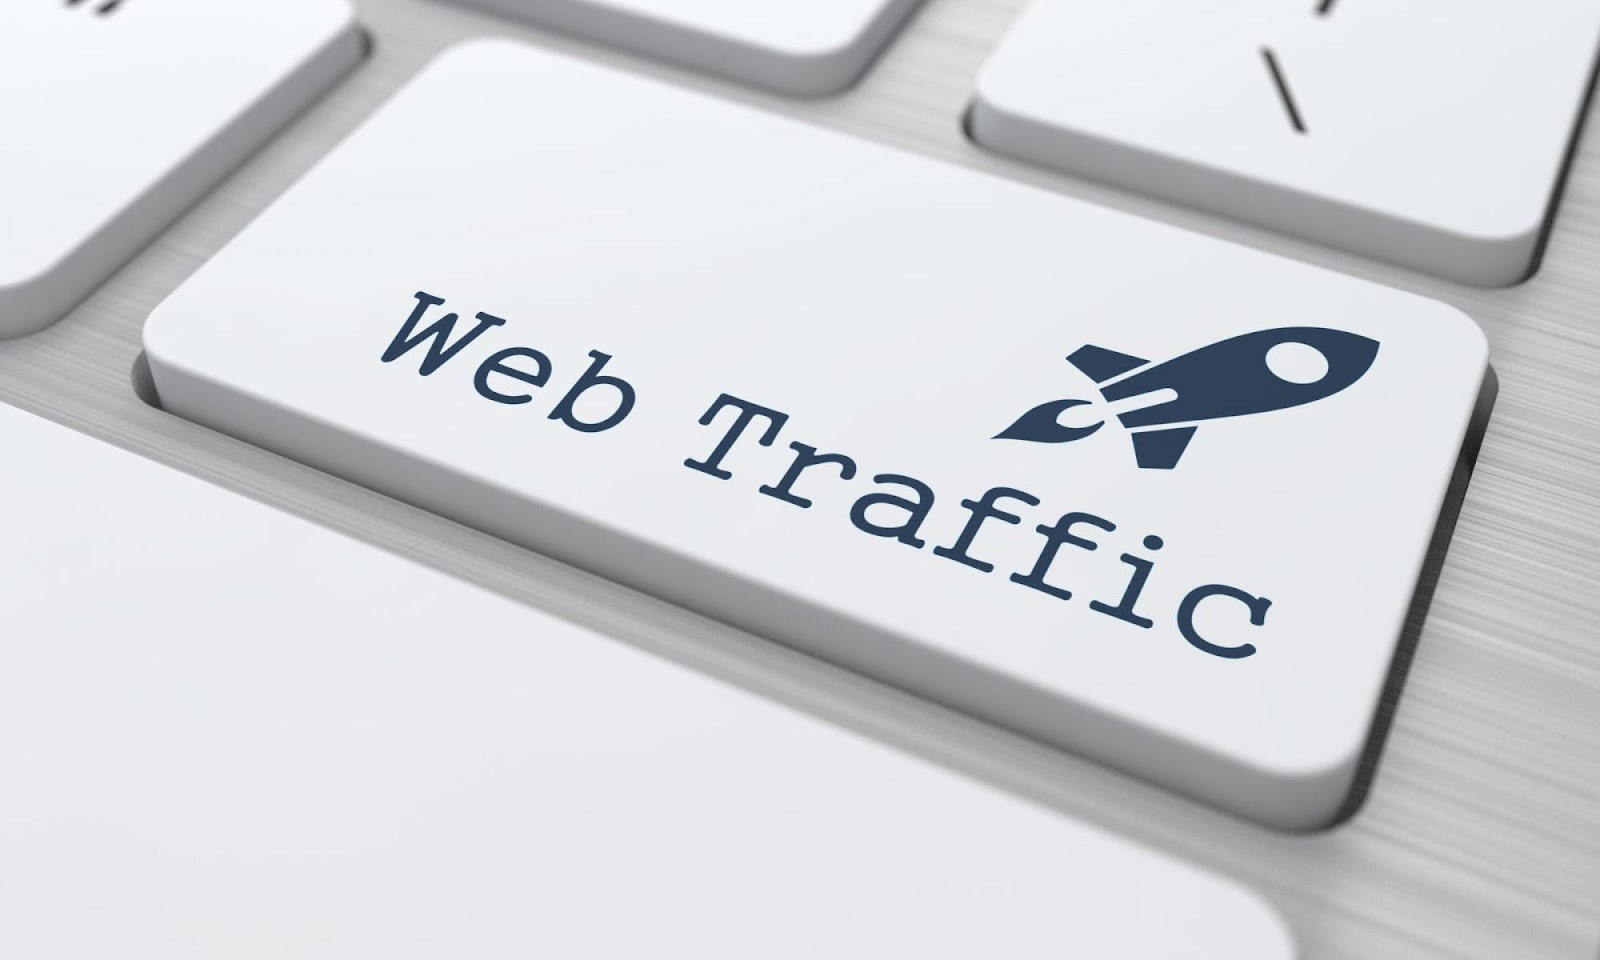 How to Increase Web Traffic Without Spending a Lot of Money?